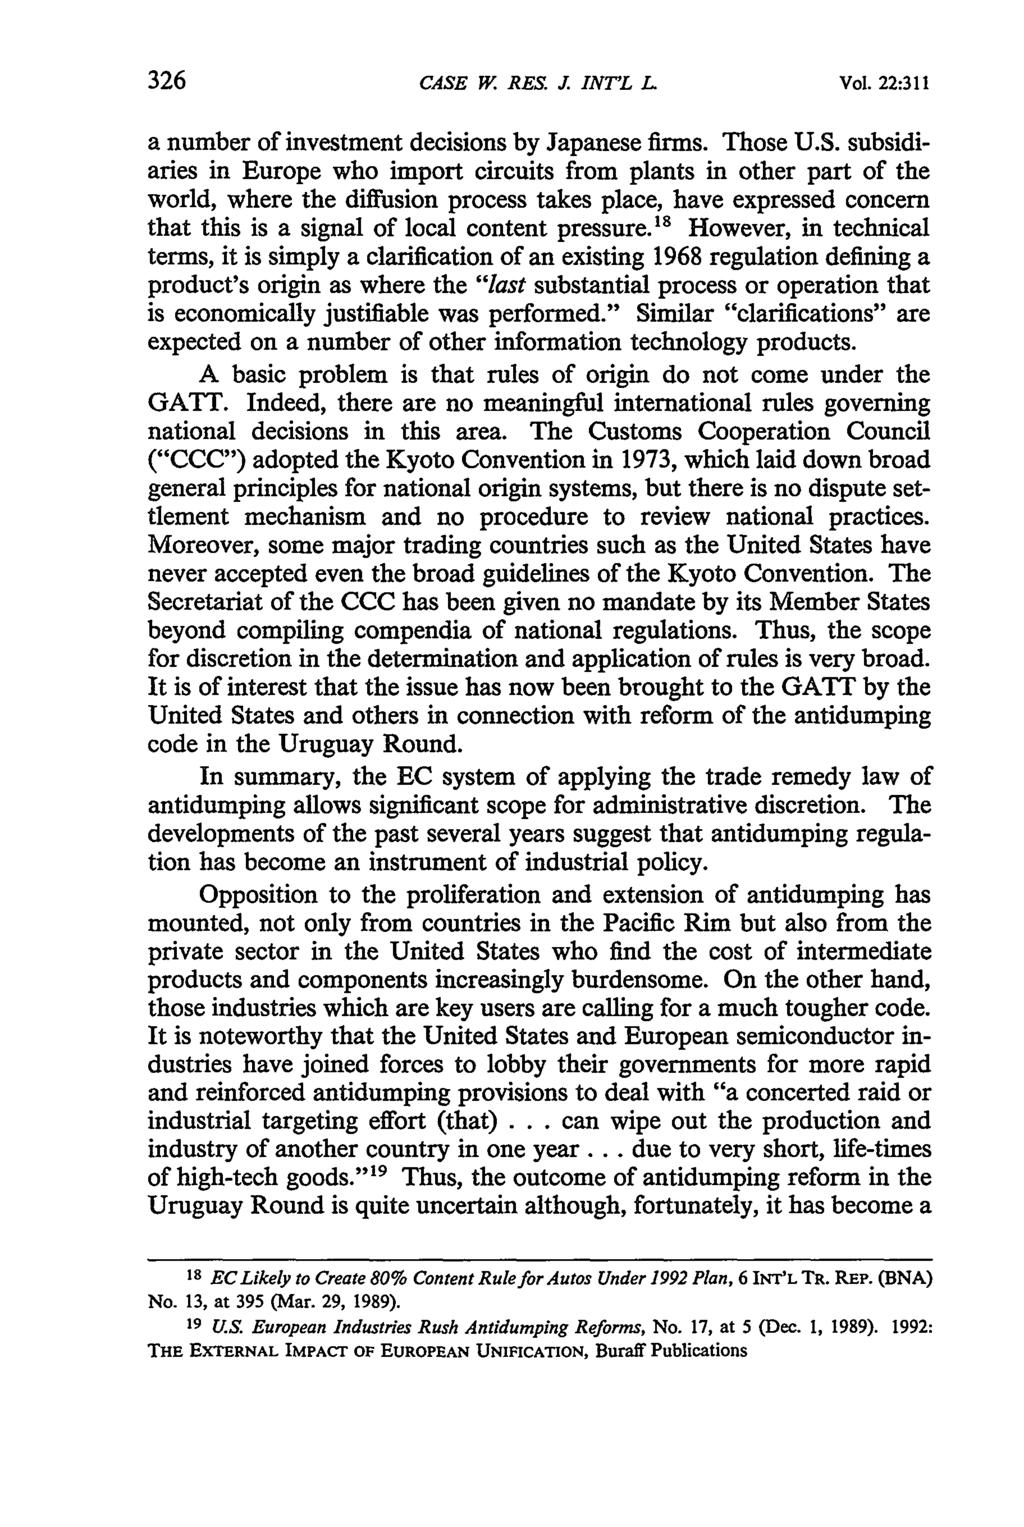 CASE W. RES. J. INT'L LV Vol. 22:311 a number of investment decisions by Japanese firms. Those U.S. subsidiaries in Europe who import circuits from plants in other part of the world, where the diffusion process takes place, have expressed concern that this is a signal of local content pressure.